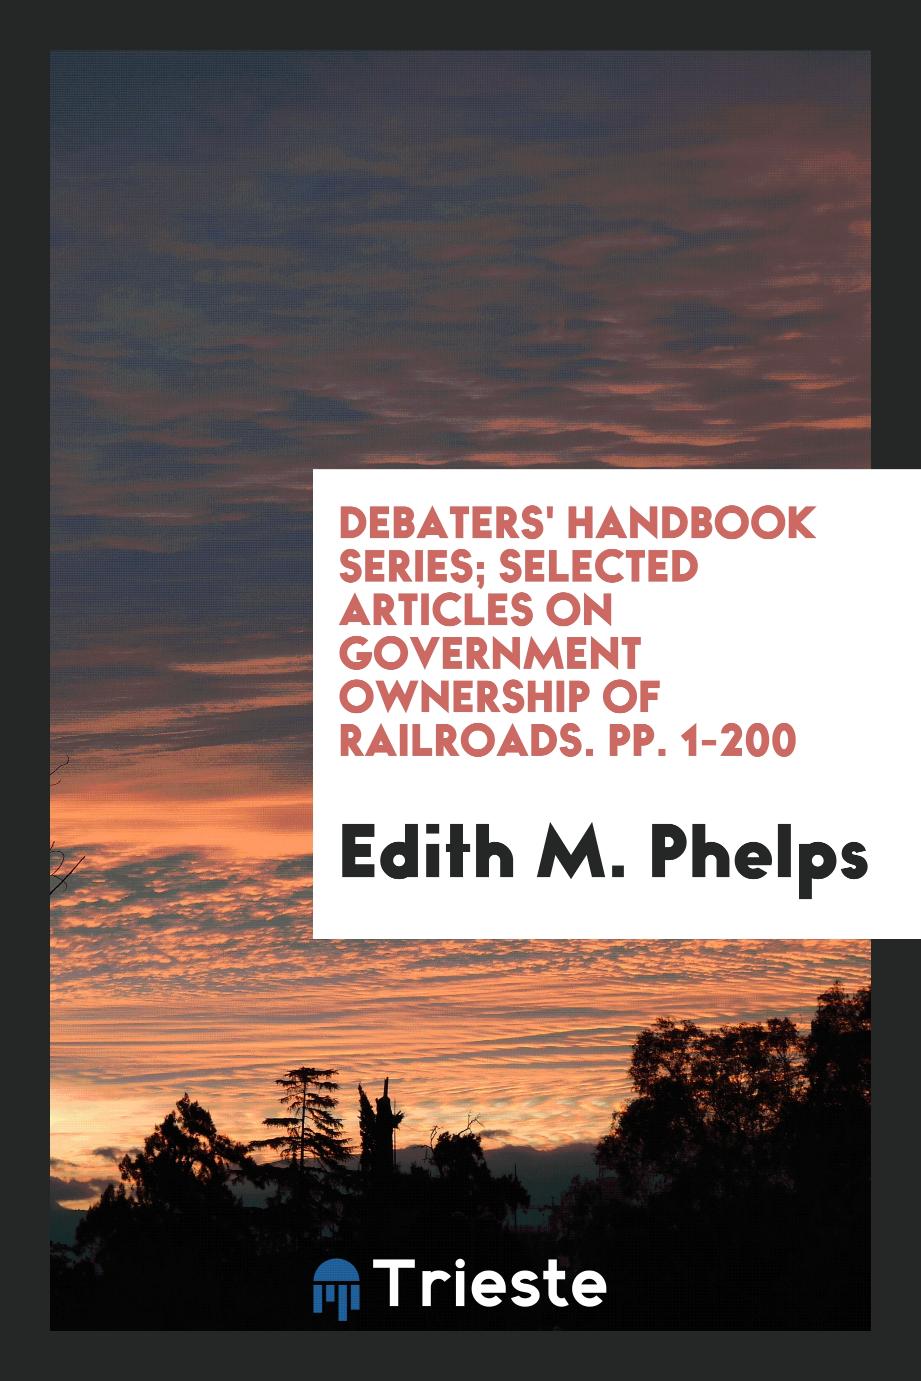 Debaters' Handbook Series; Selected Articles on Government Ownership of Railroads. pp. 1-200